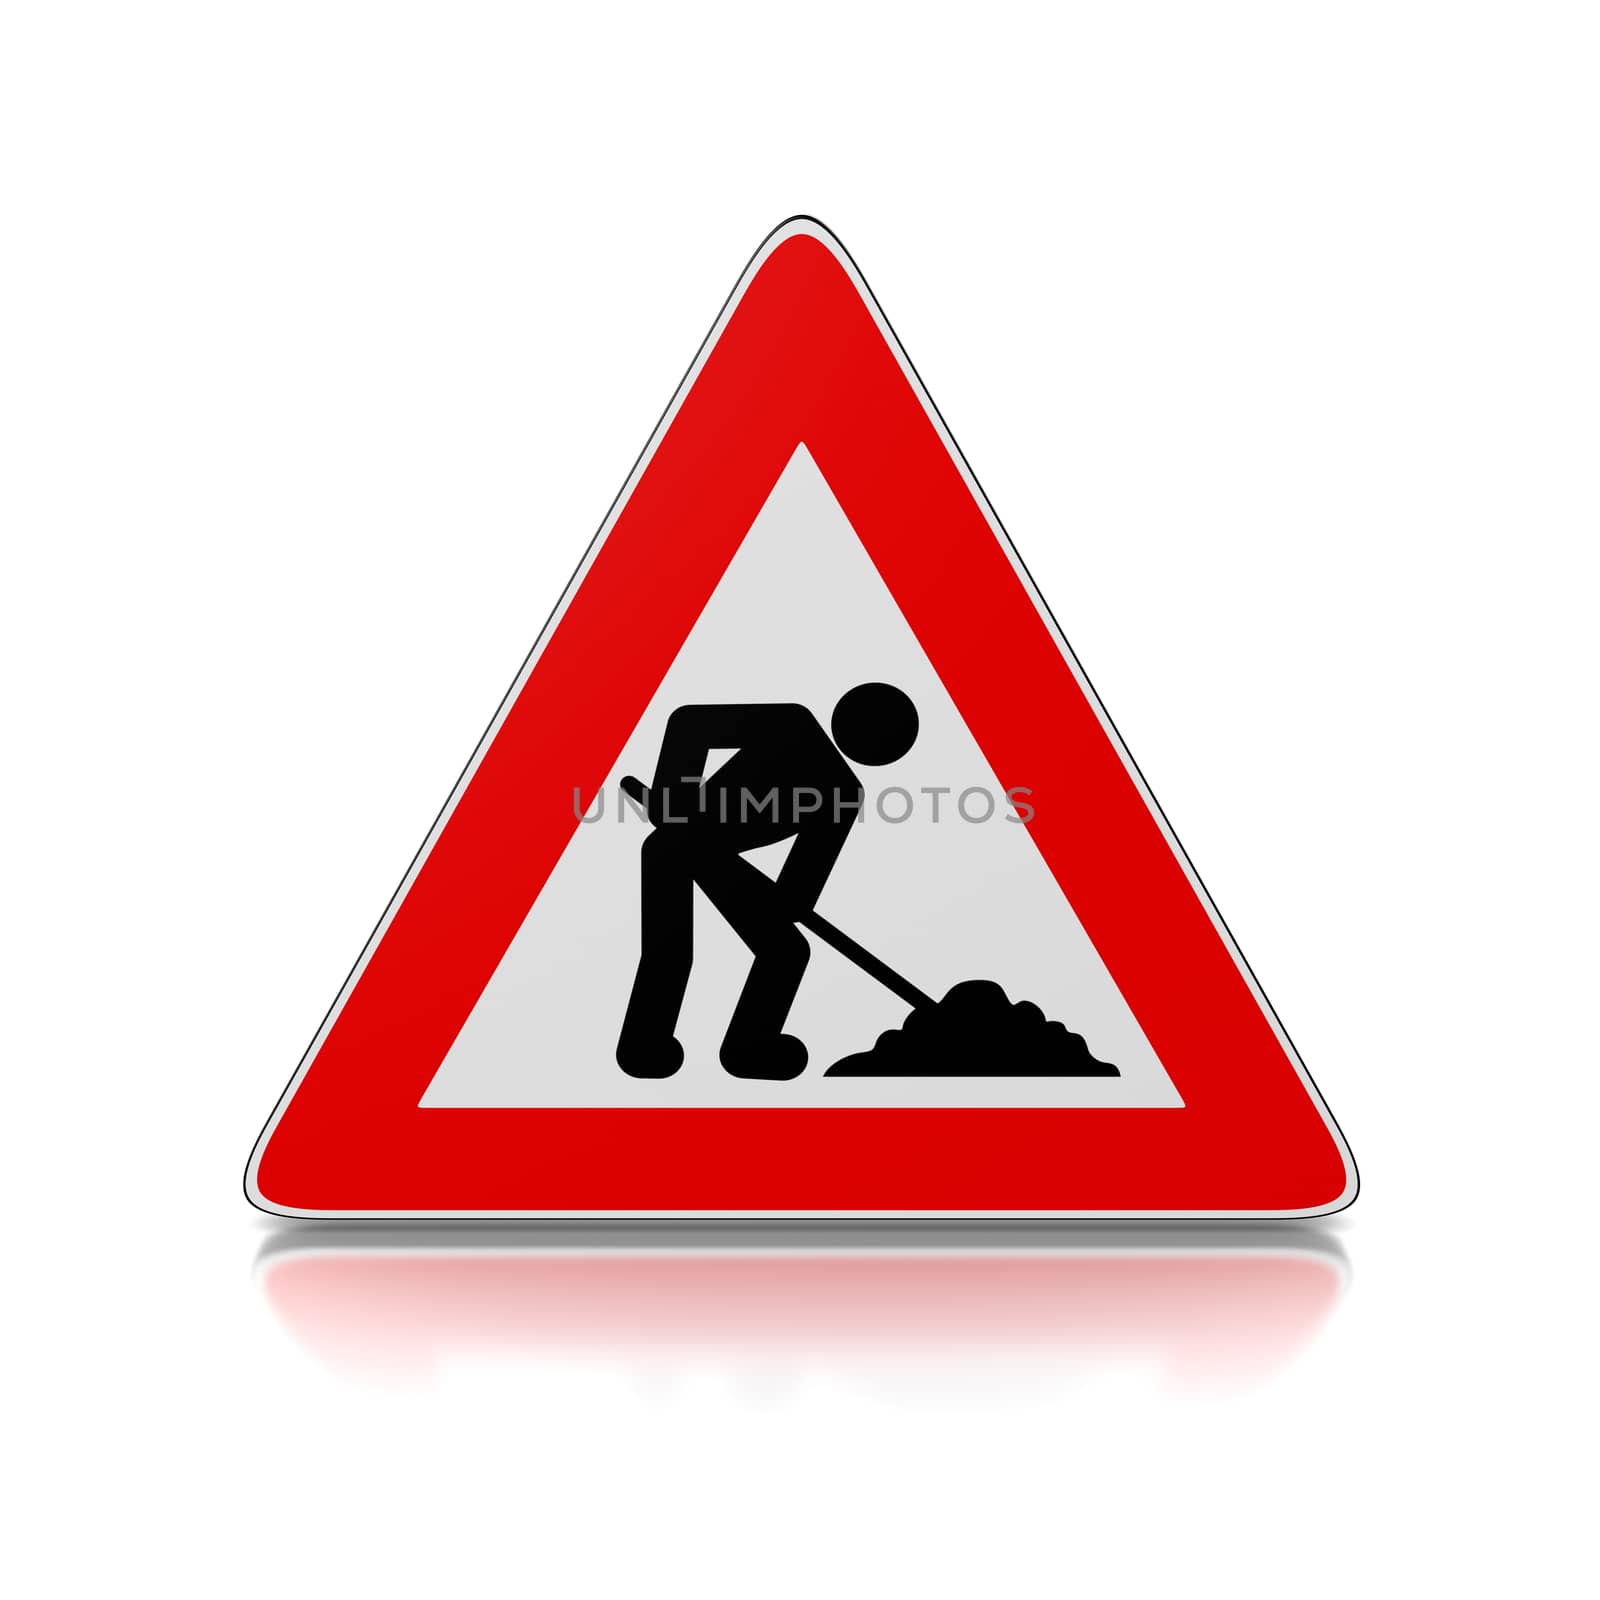 Red and White Man at Work Warning Triangle Road Sign on White Background 3D Illustration